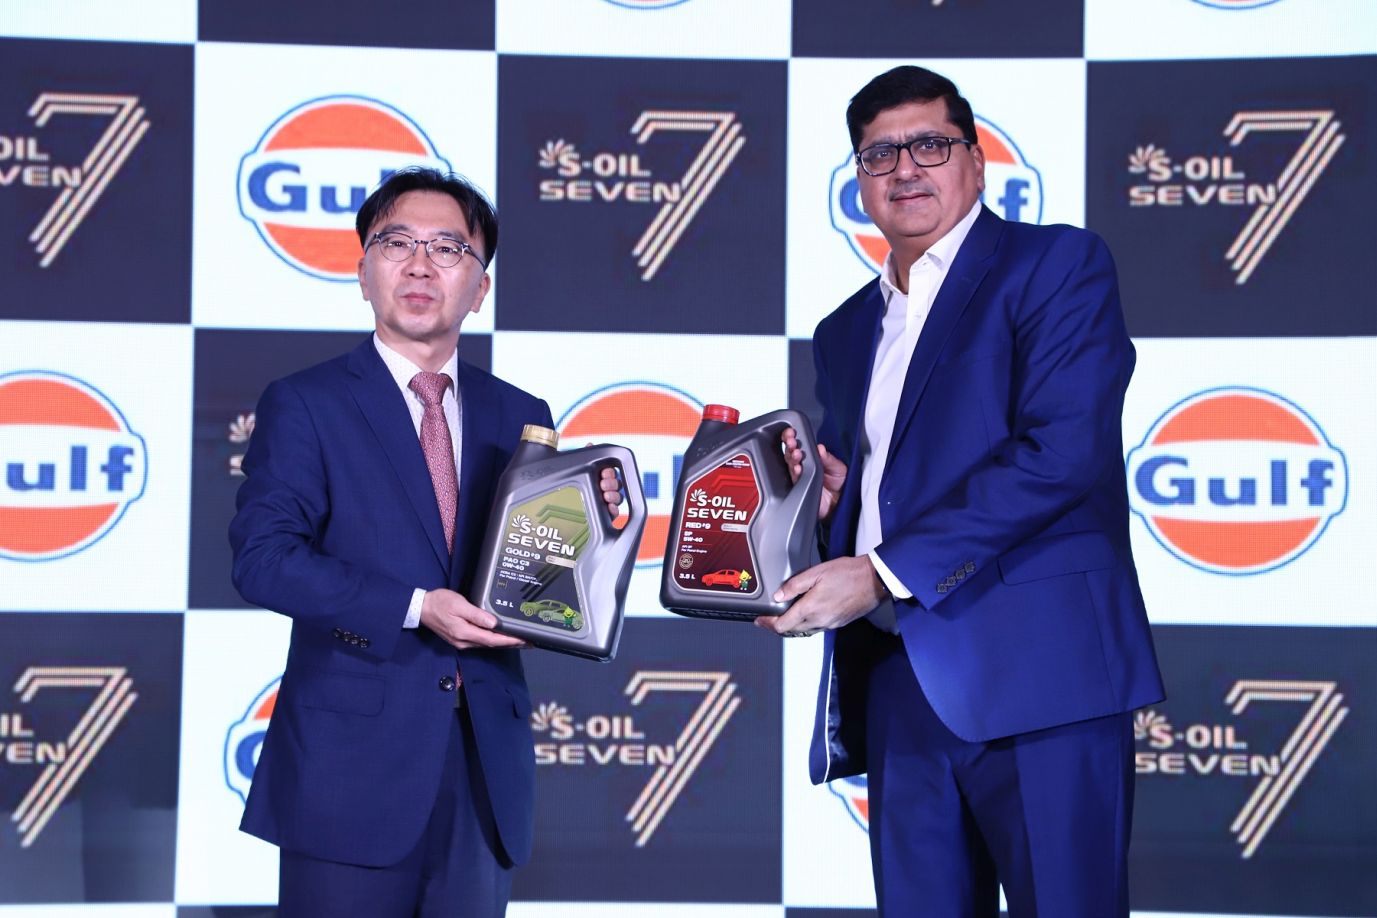 Gulf Oil and S-OIL SEVEN Join Forces to Expand Footprint in India